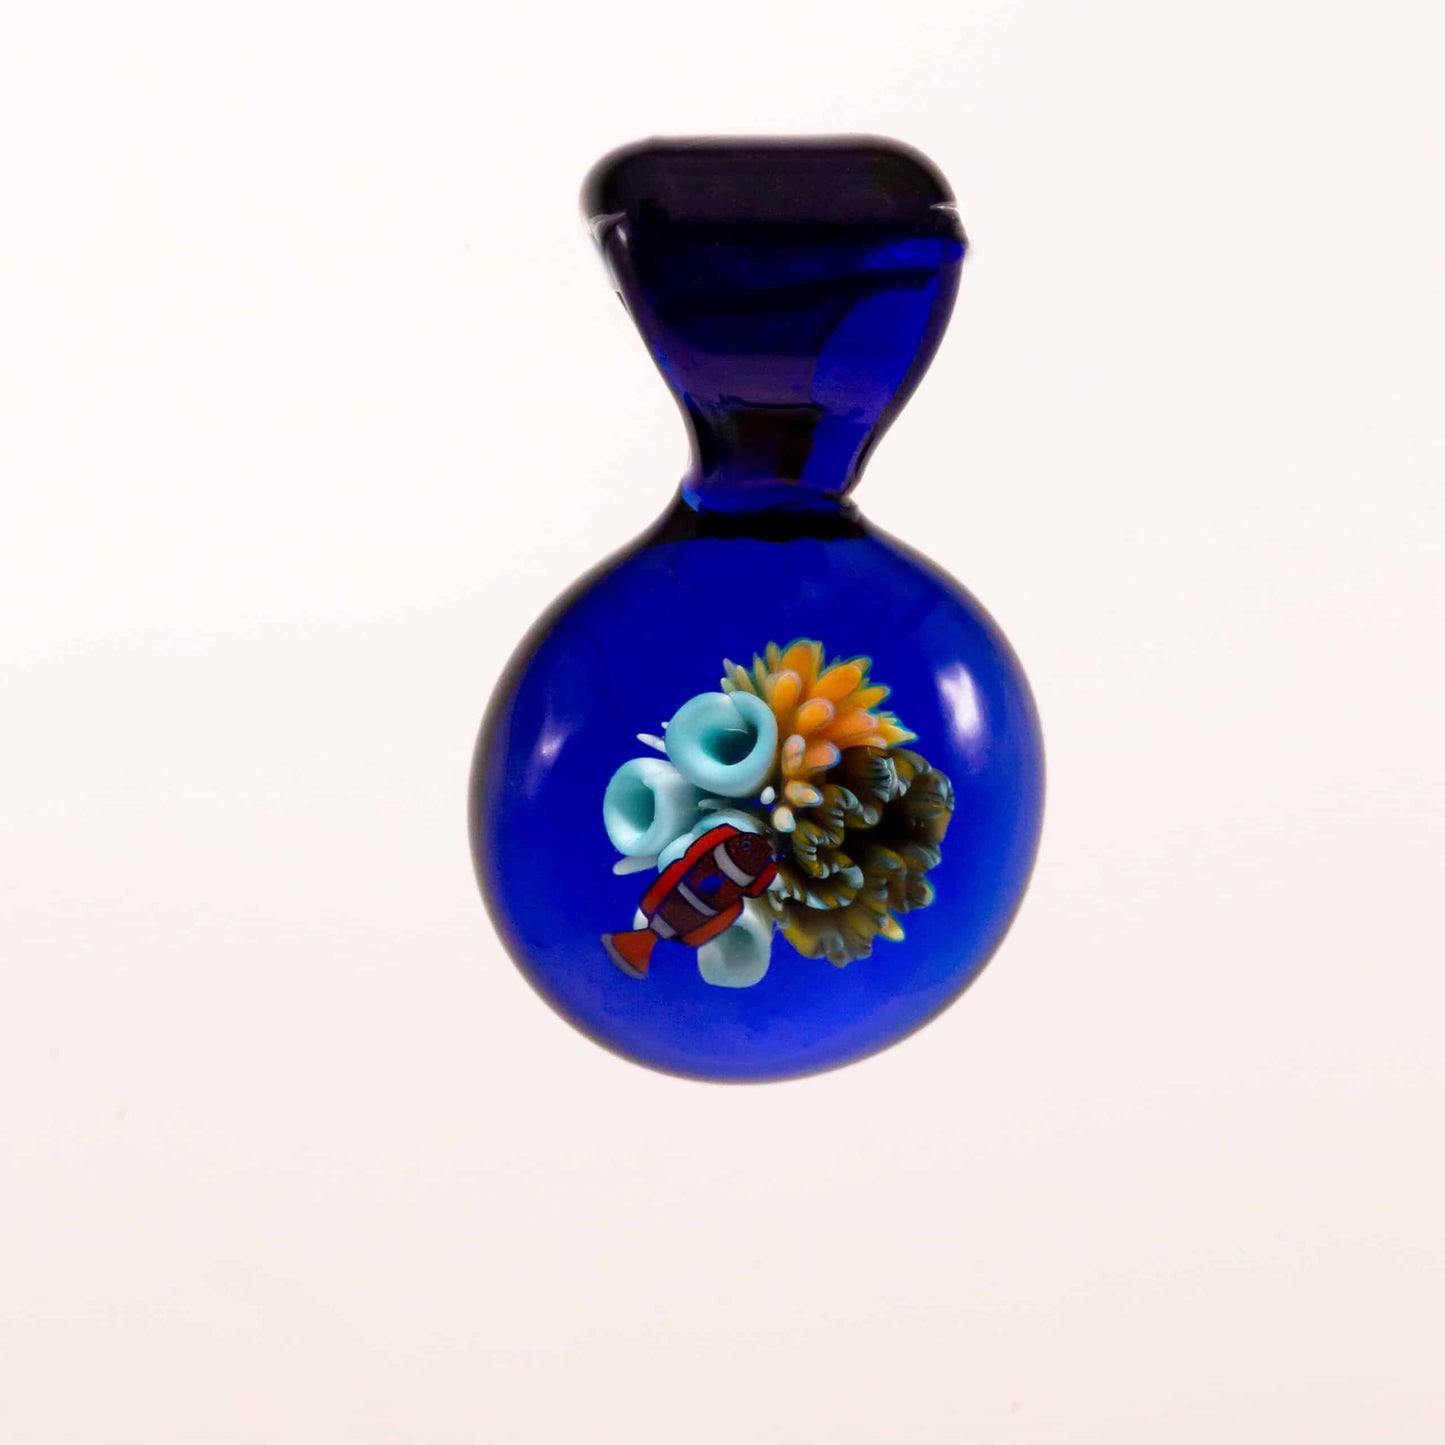 innovative glass pendant - Coral Reef Pendant (BLUE, CLOWNFISH) #3 BY KIMMO